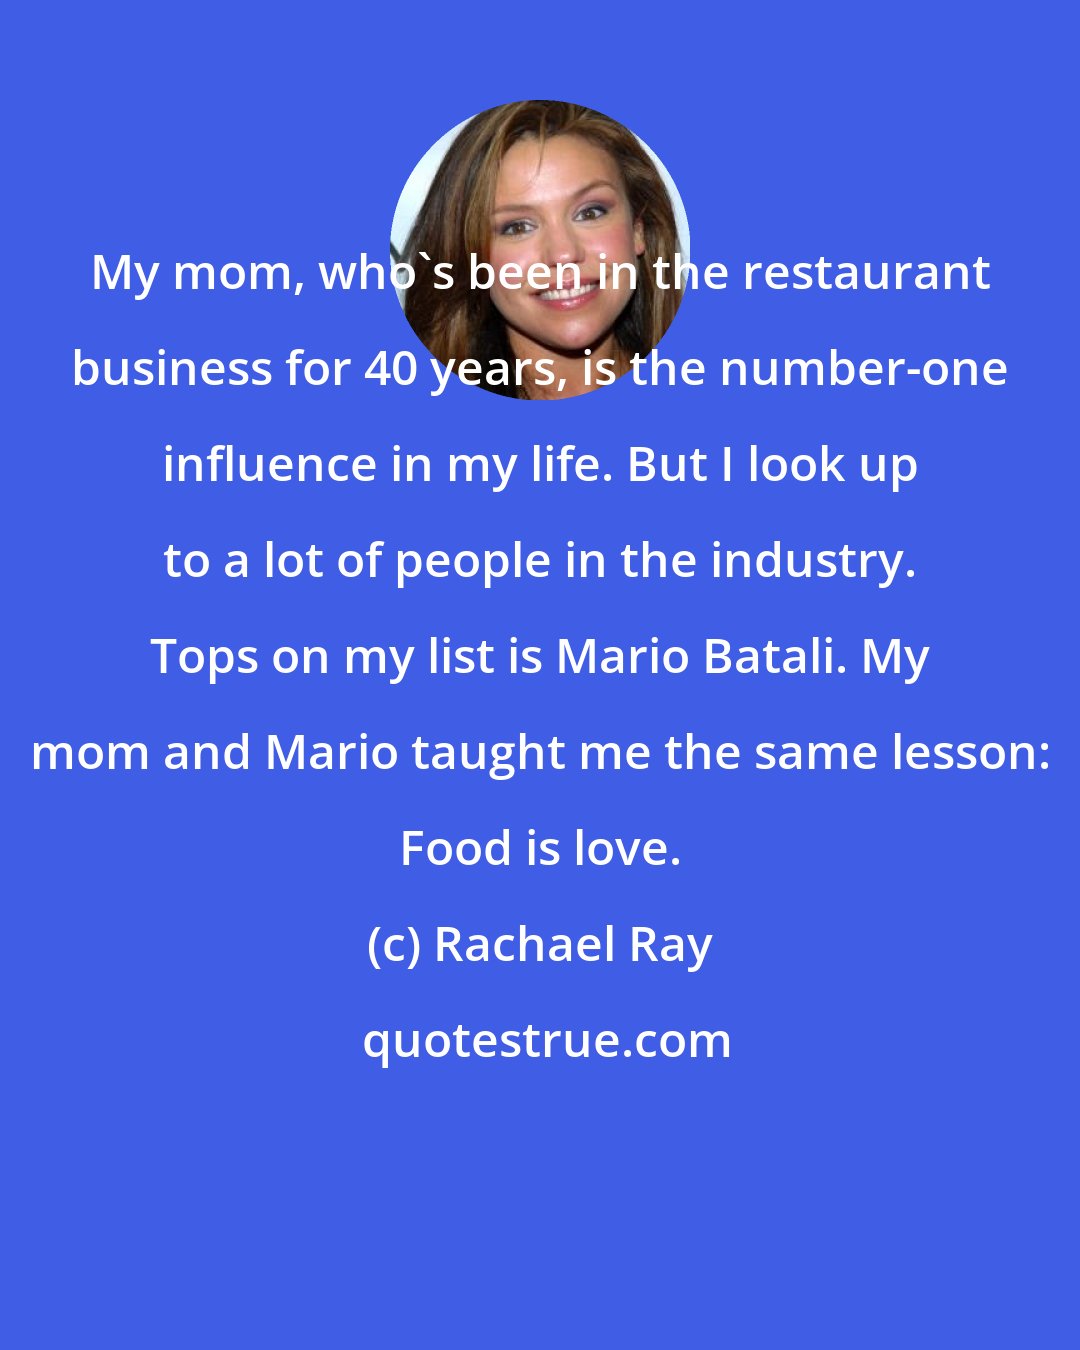 Rachael Ray: My mom, who's been in the restaurant business for 40 years, is the number-one influence in my life. But I look up to a lot of people in the industry. Tops on my list is Mario Batali. My mom and Mario taught me the same lesson: Food is love.